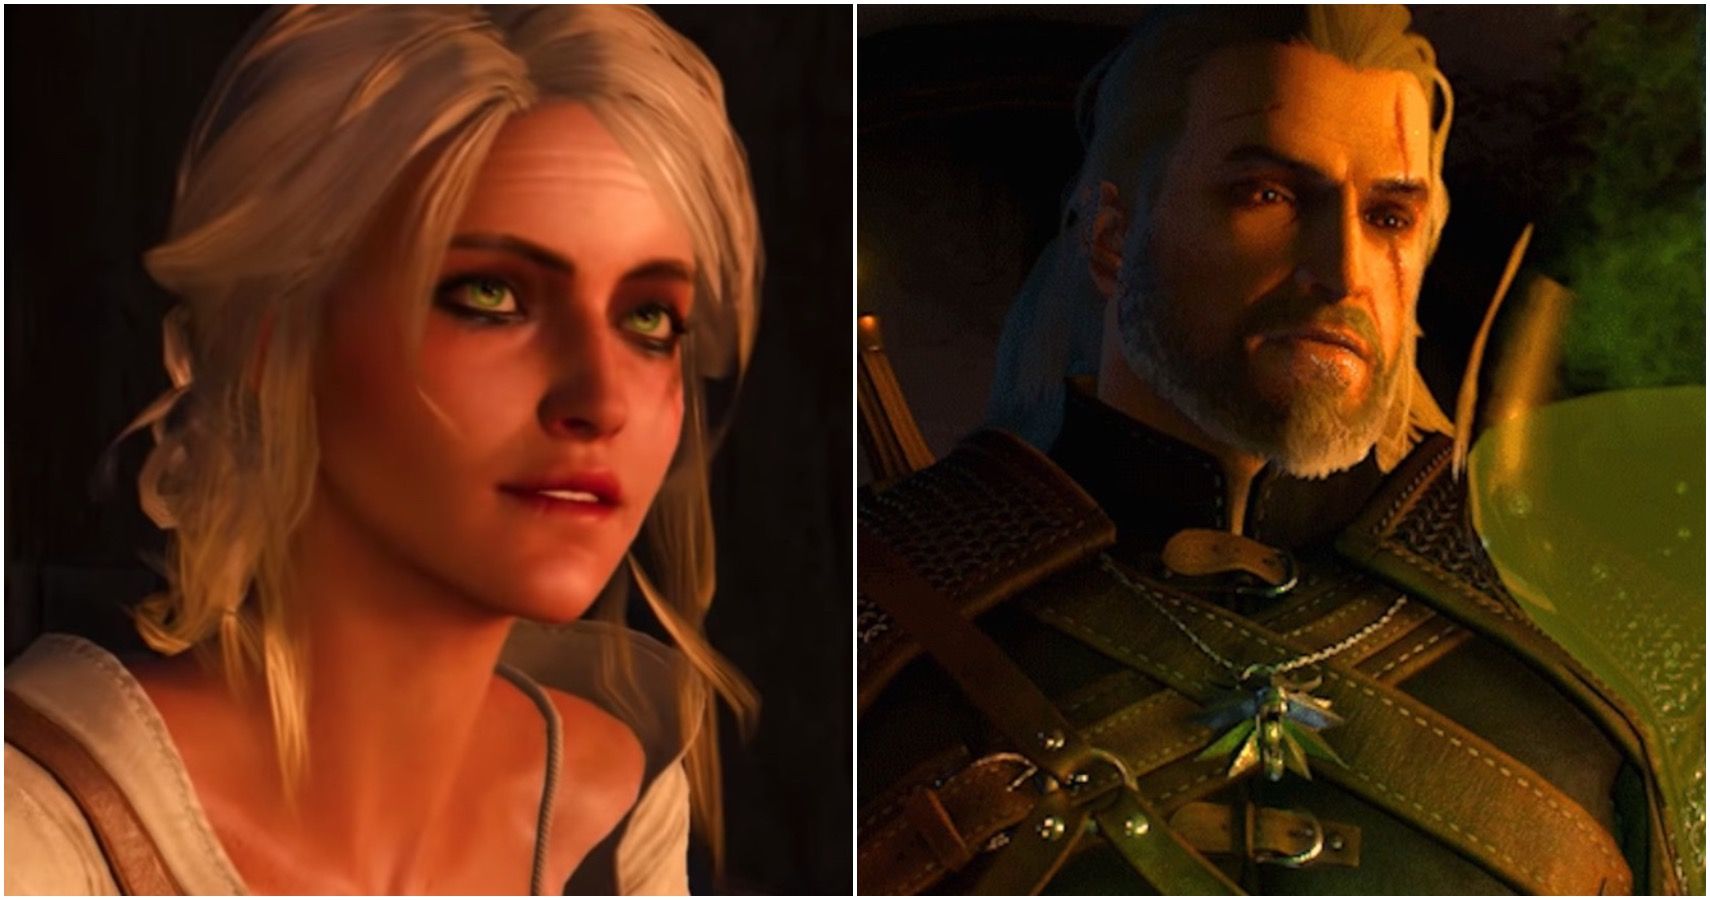 World you be happy to play as Cirilla in the next witcher game ? : r/witcher